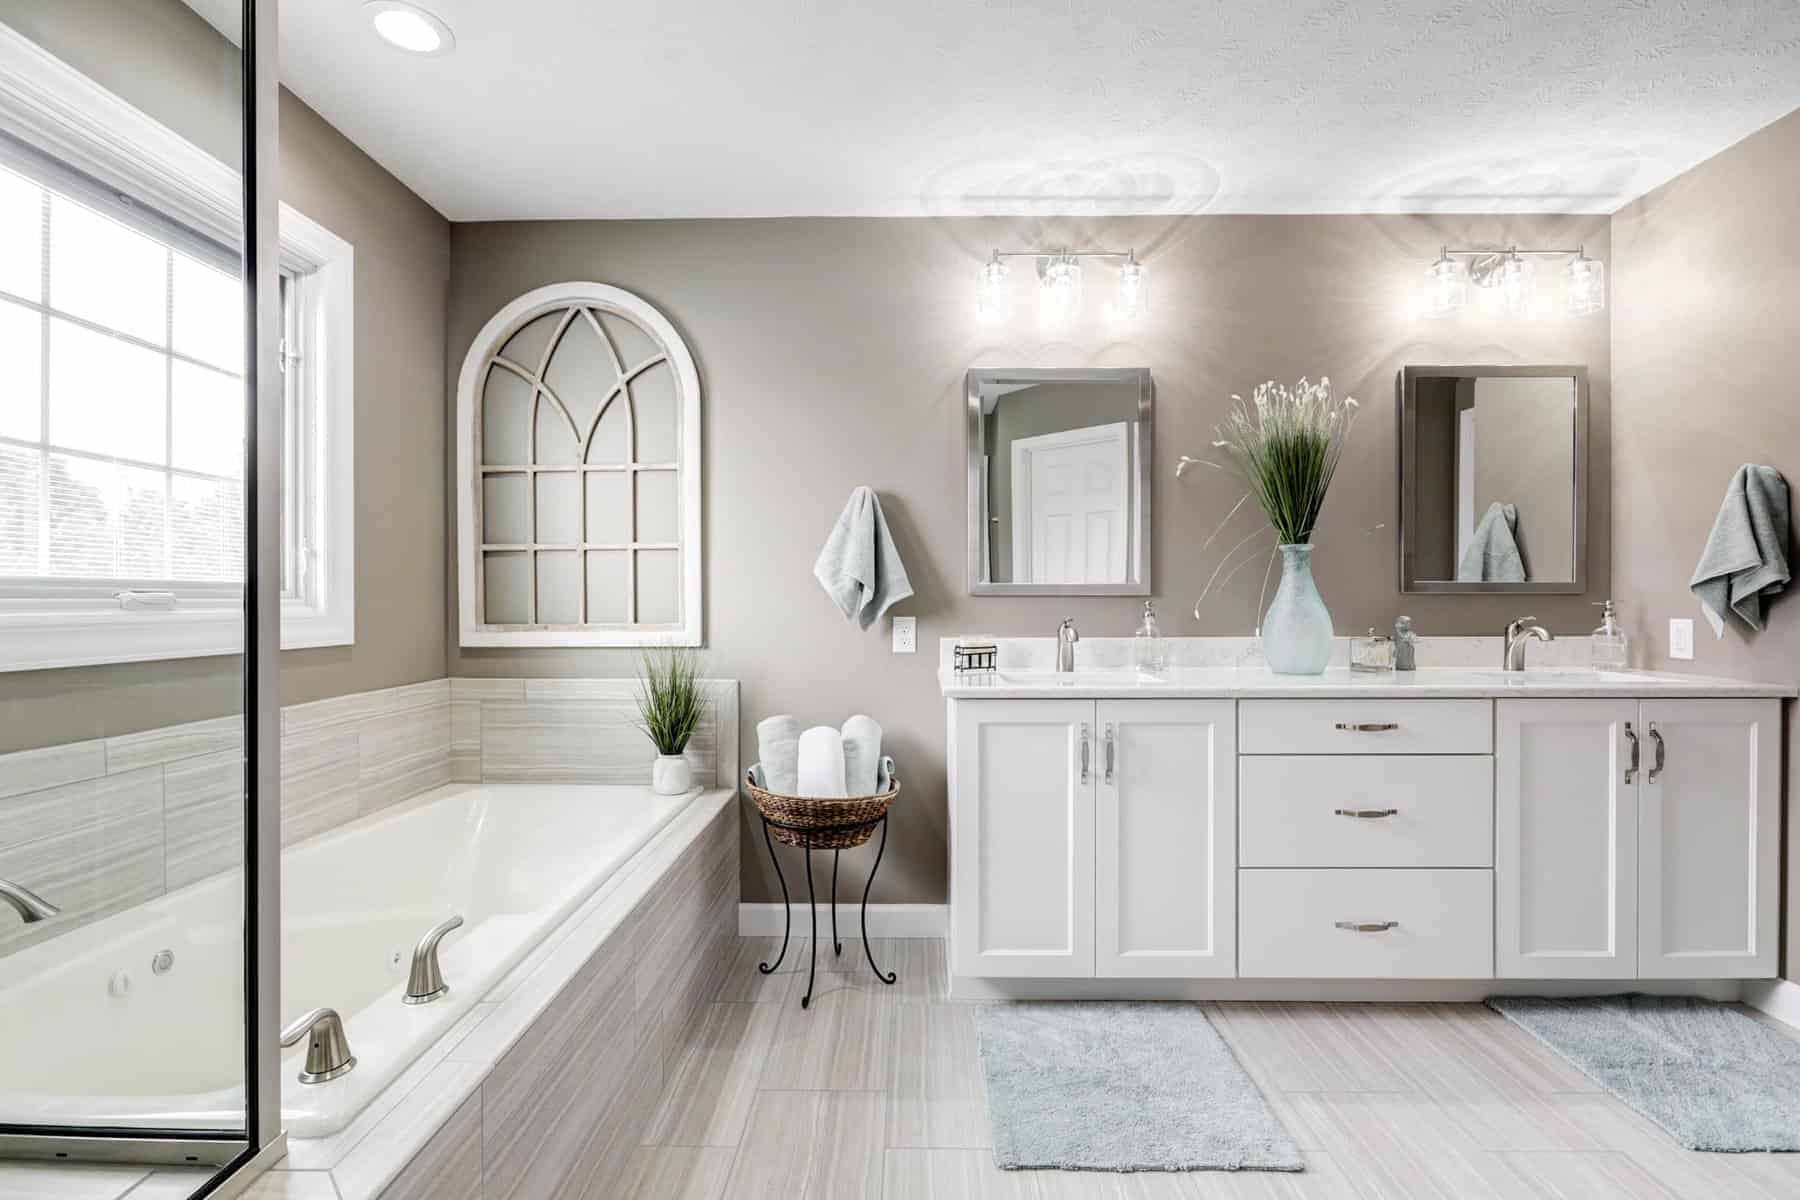 Master bathroom with cream interiors complete with a bathtub and twin mirror and wide wooden cabinet